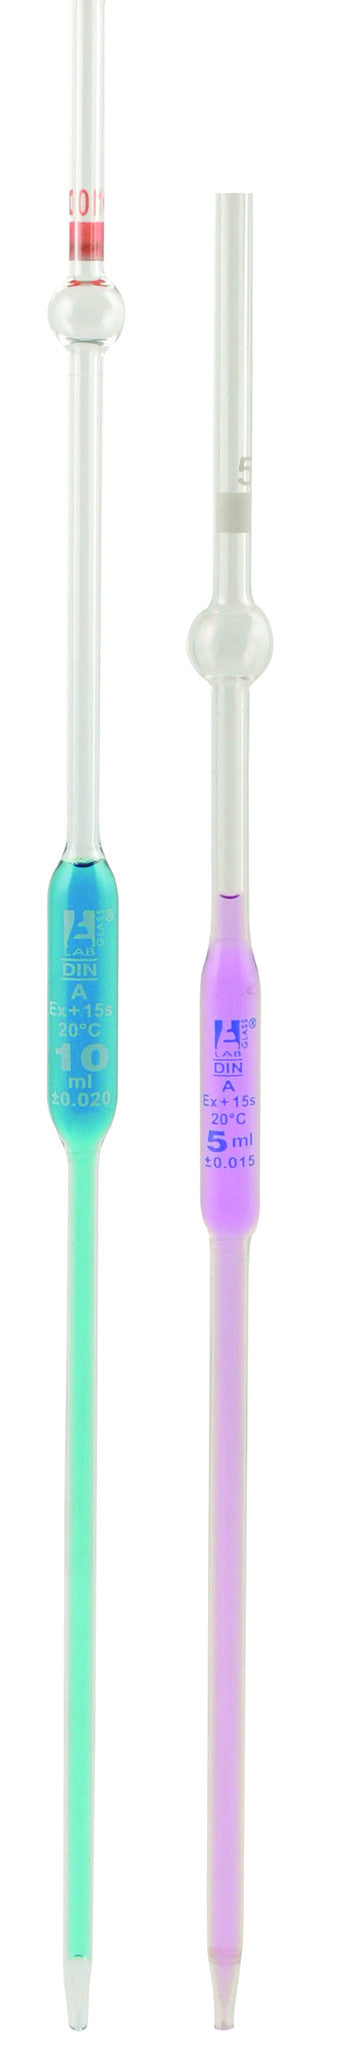 Pipettes Class - B with Safety Bulb, 100 ml, White Graduation